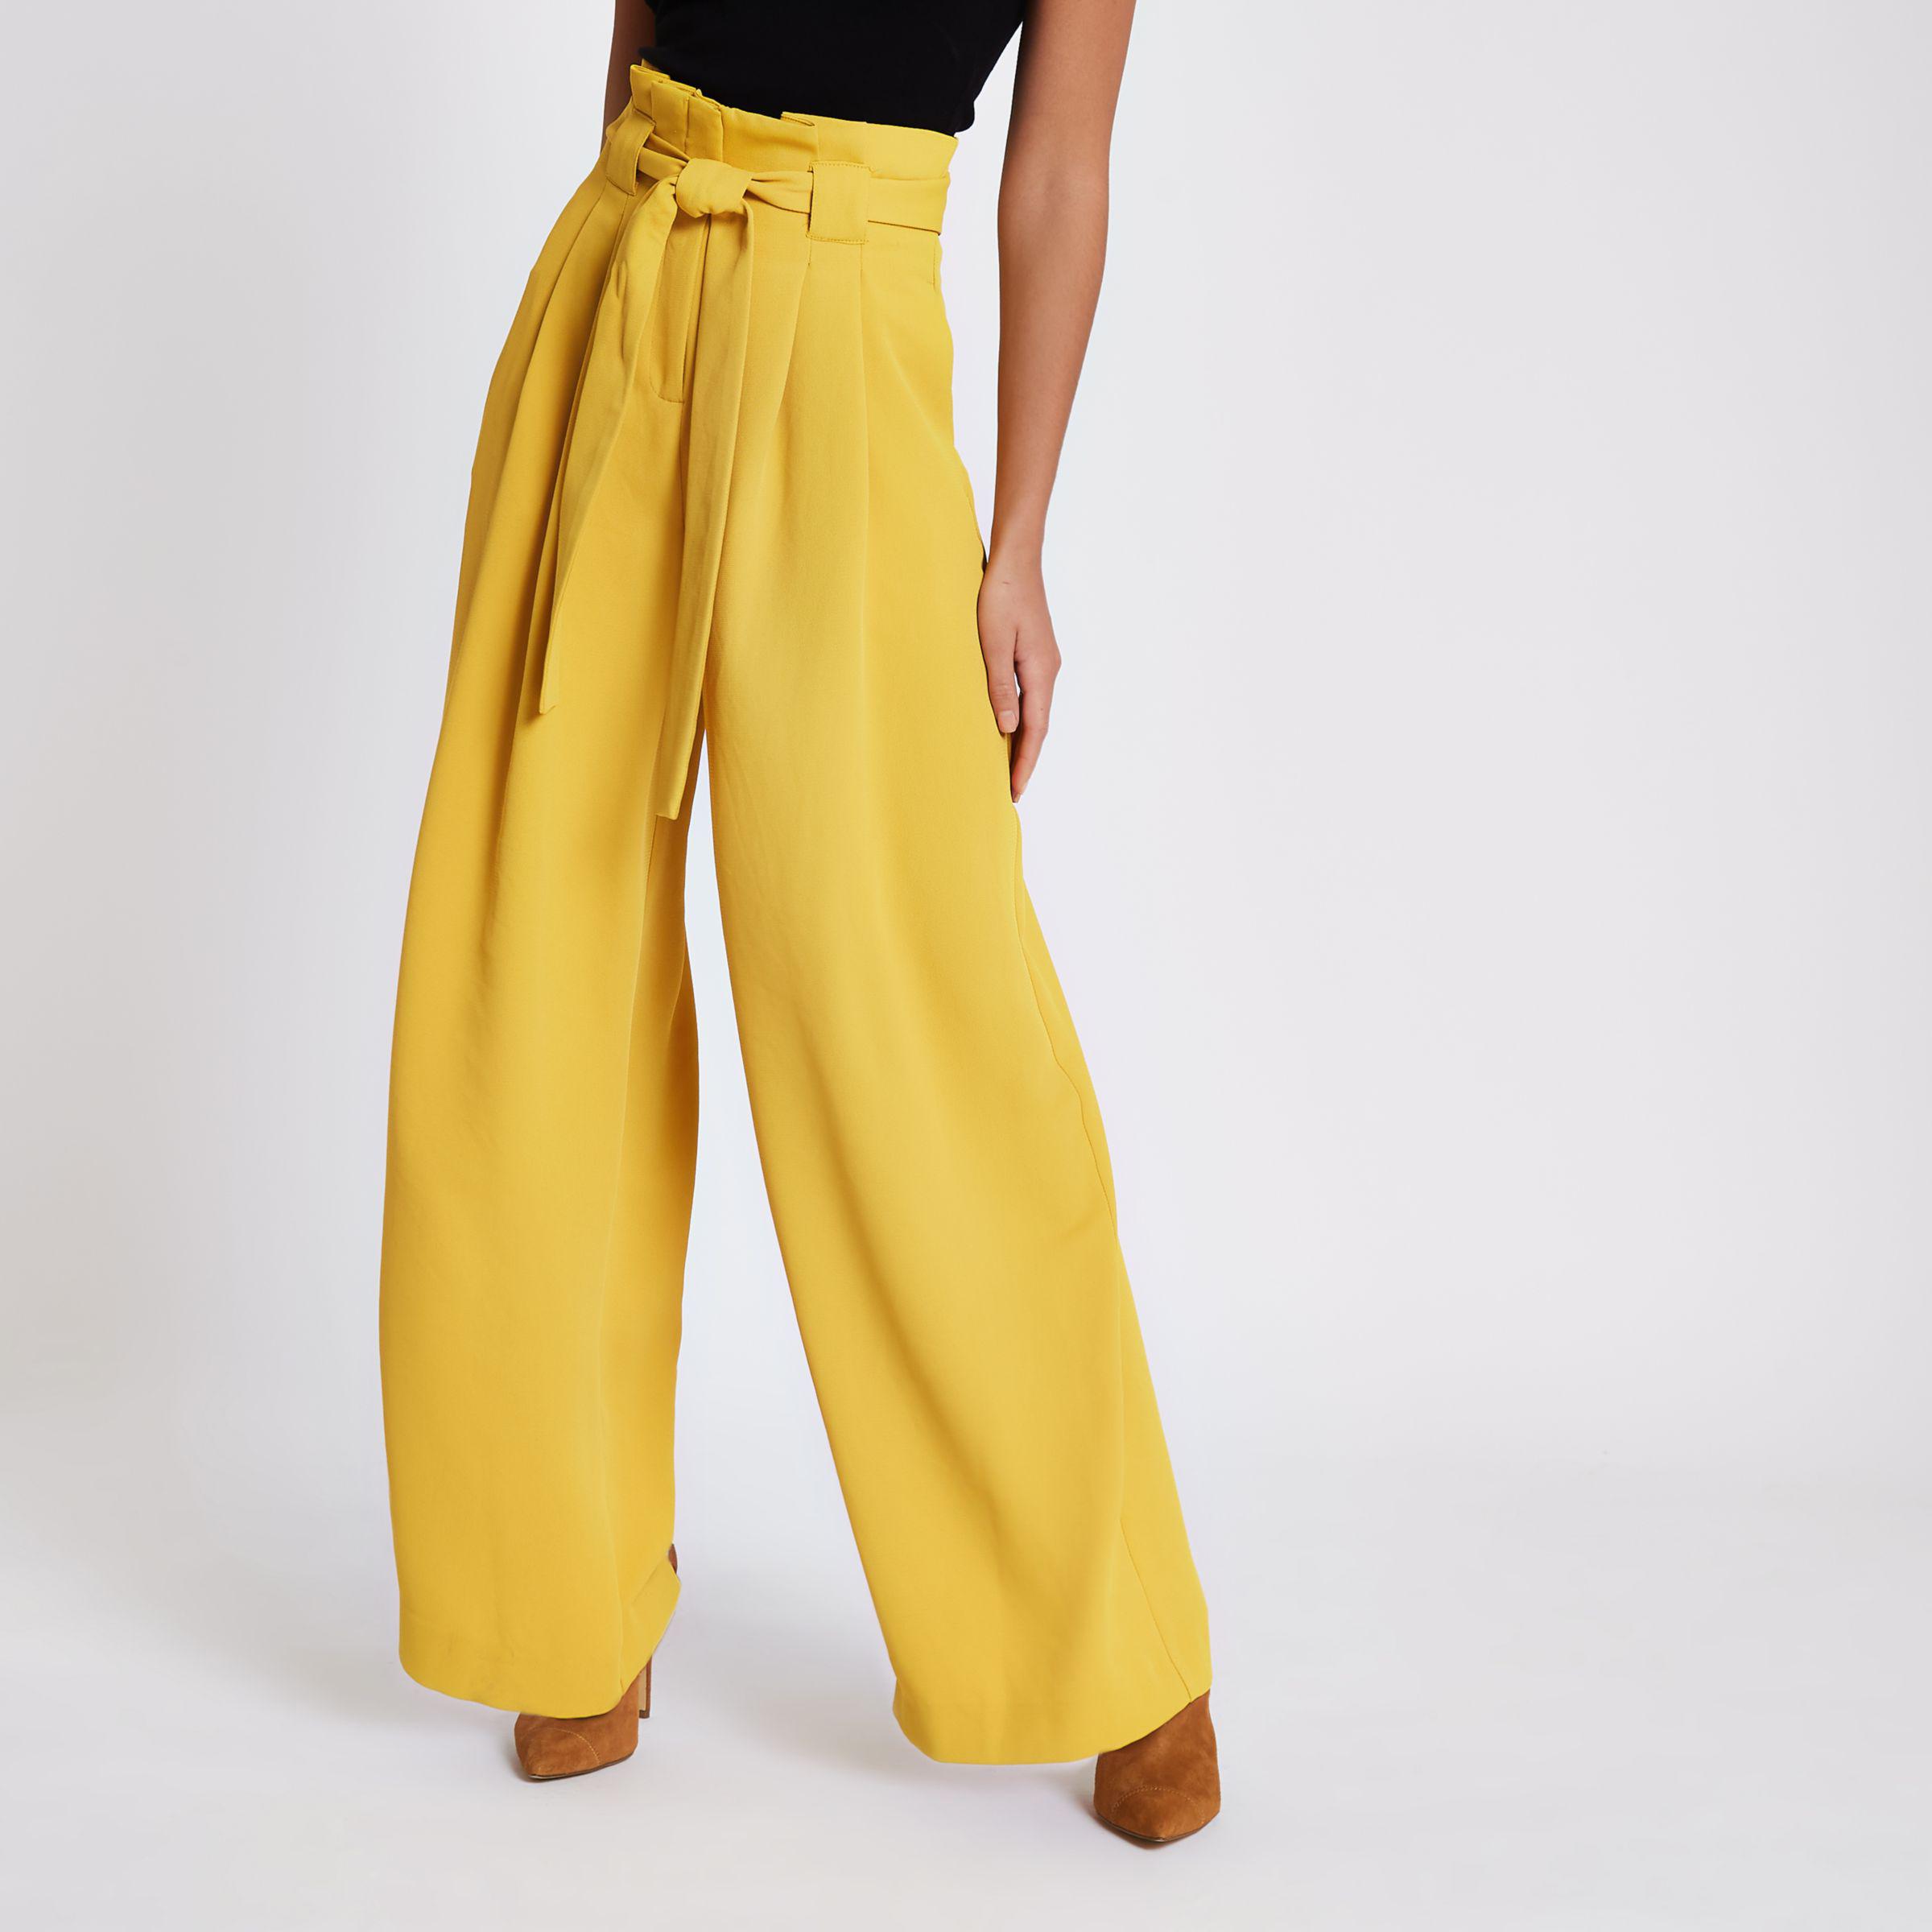 River Island Synthetic Paperbag Wide Leg Trousers in Yellow | Lyst UK